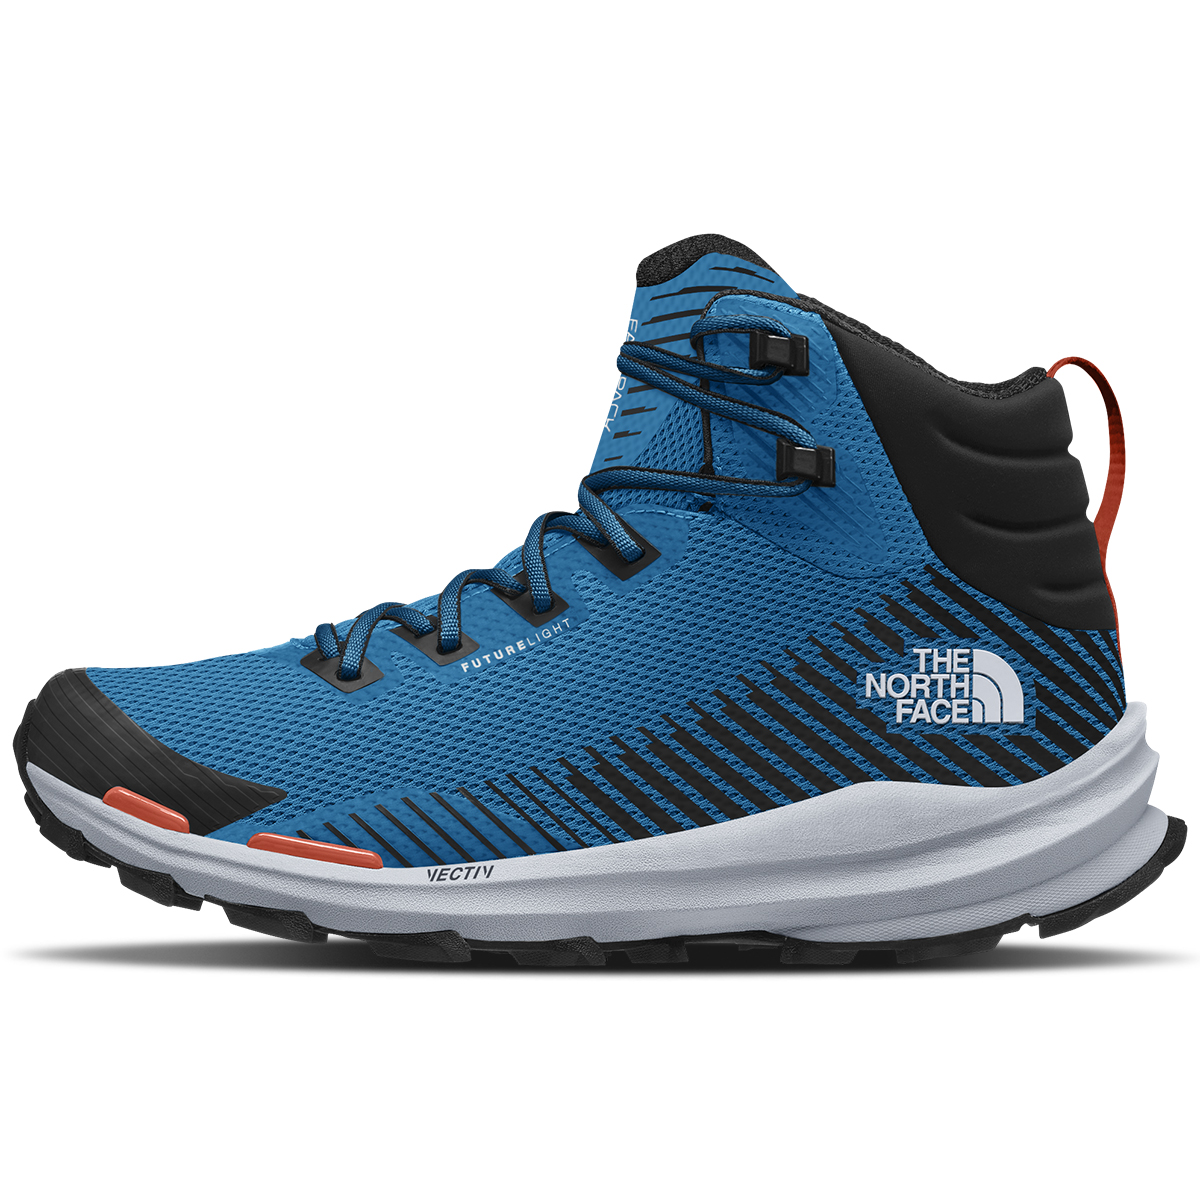 The North Face Men's Vectiv Fastpack Mid Futurelight Hiking Boots